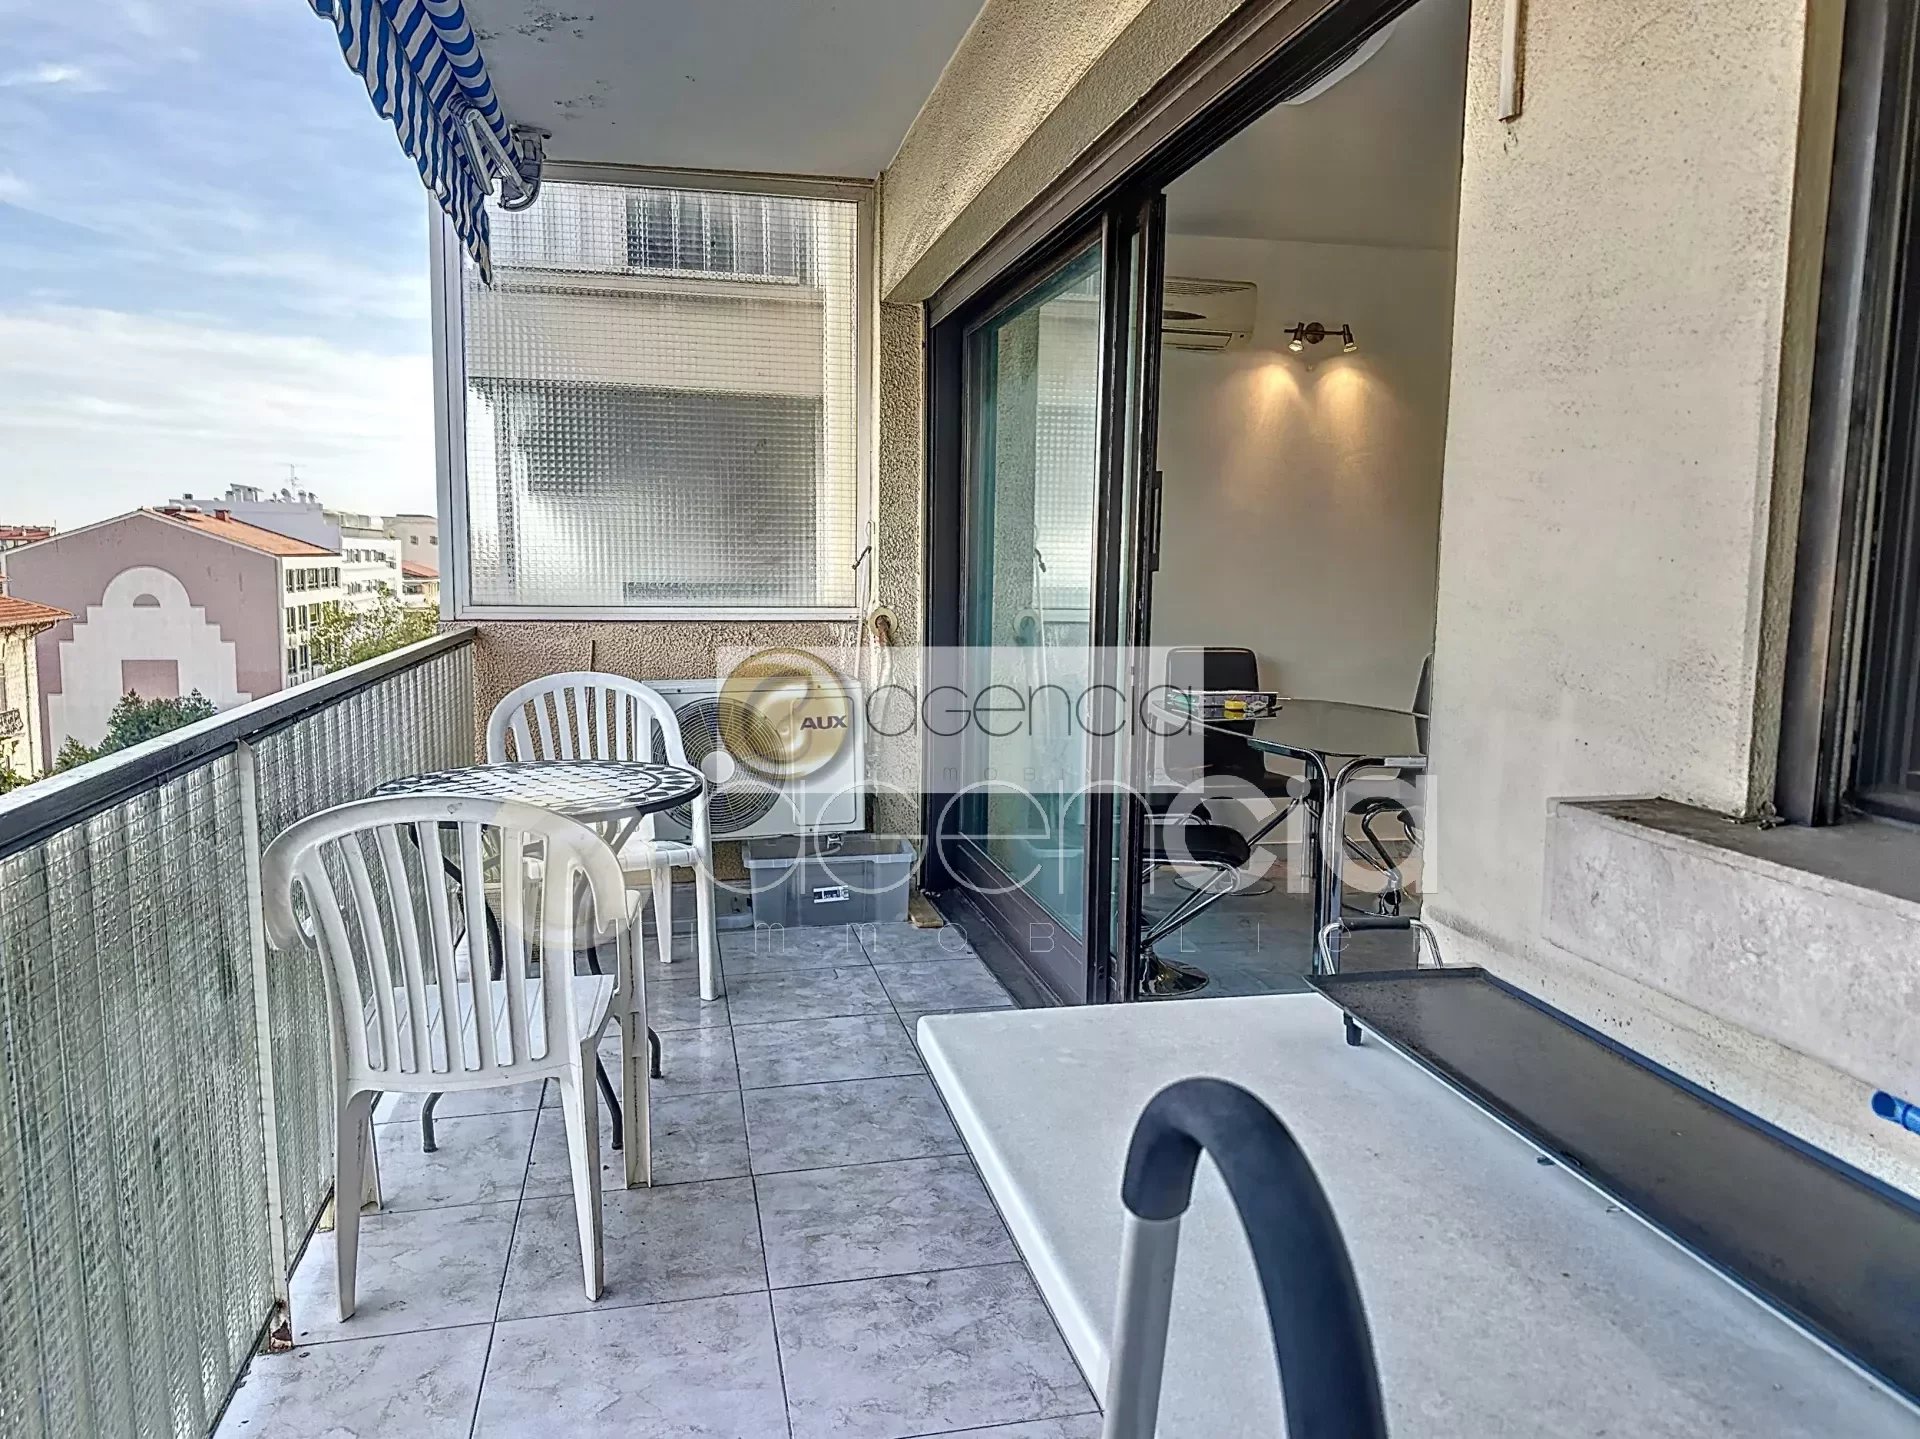 SPACIOUS 2-BEDROOM FLAT OF 89M2 - 2 TERRACES - CANNES CENTRE